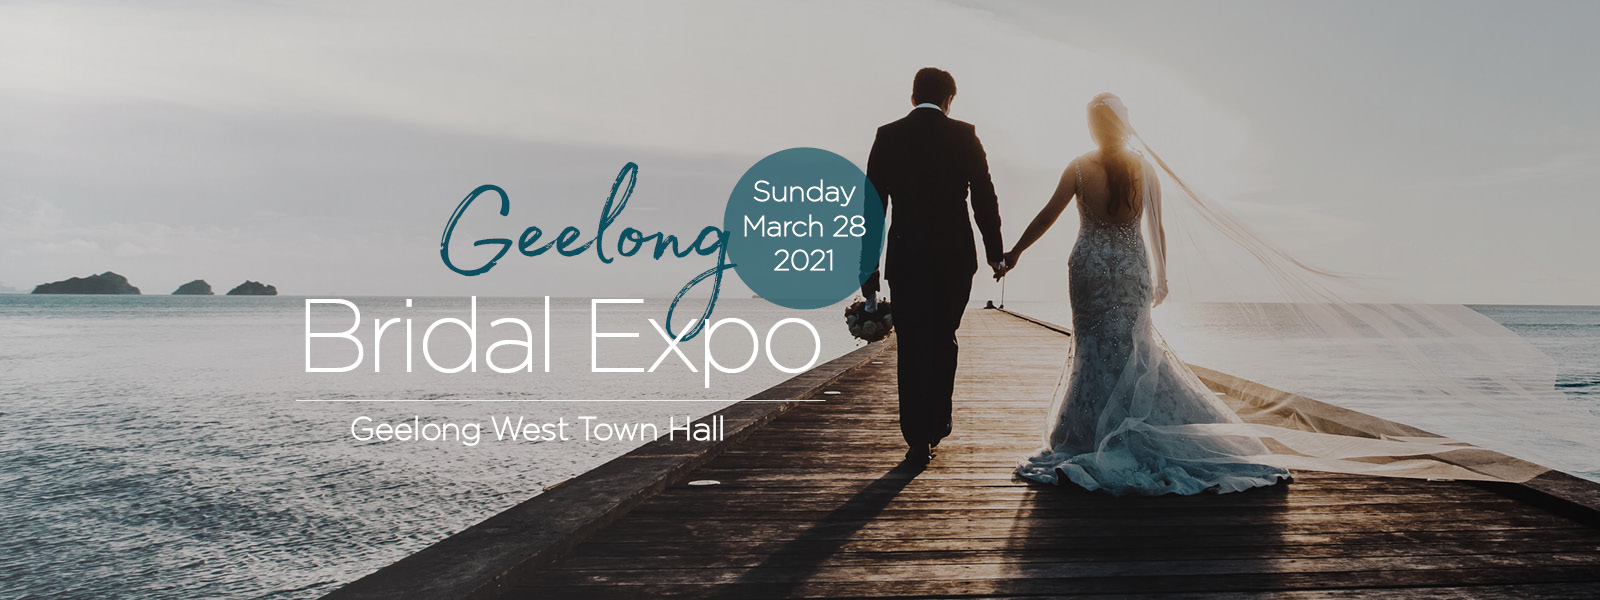 Geelong Bridal Expo March 2021